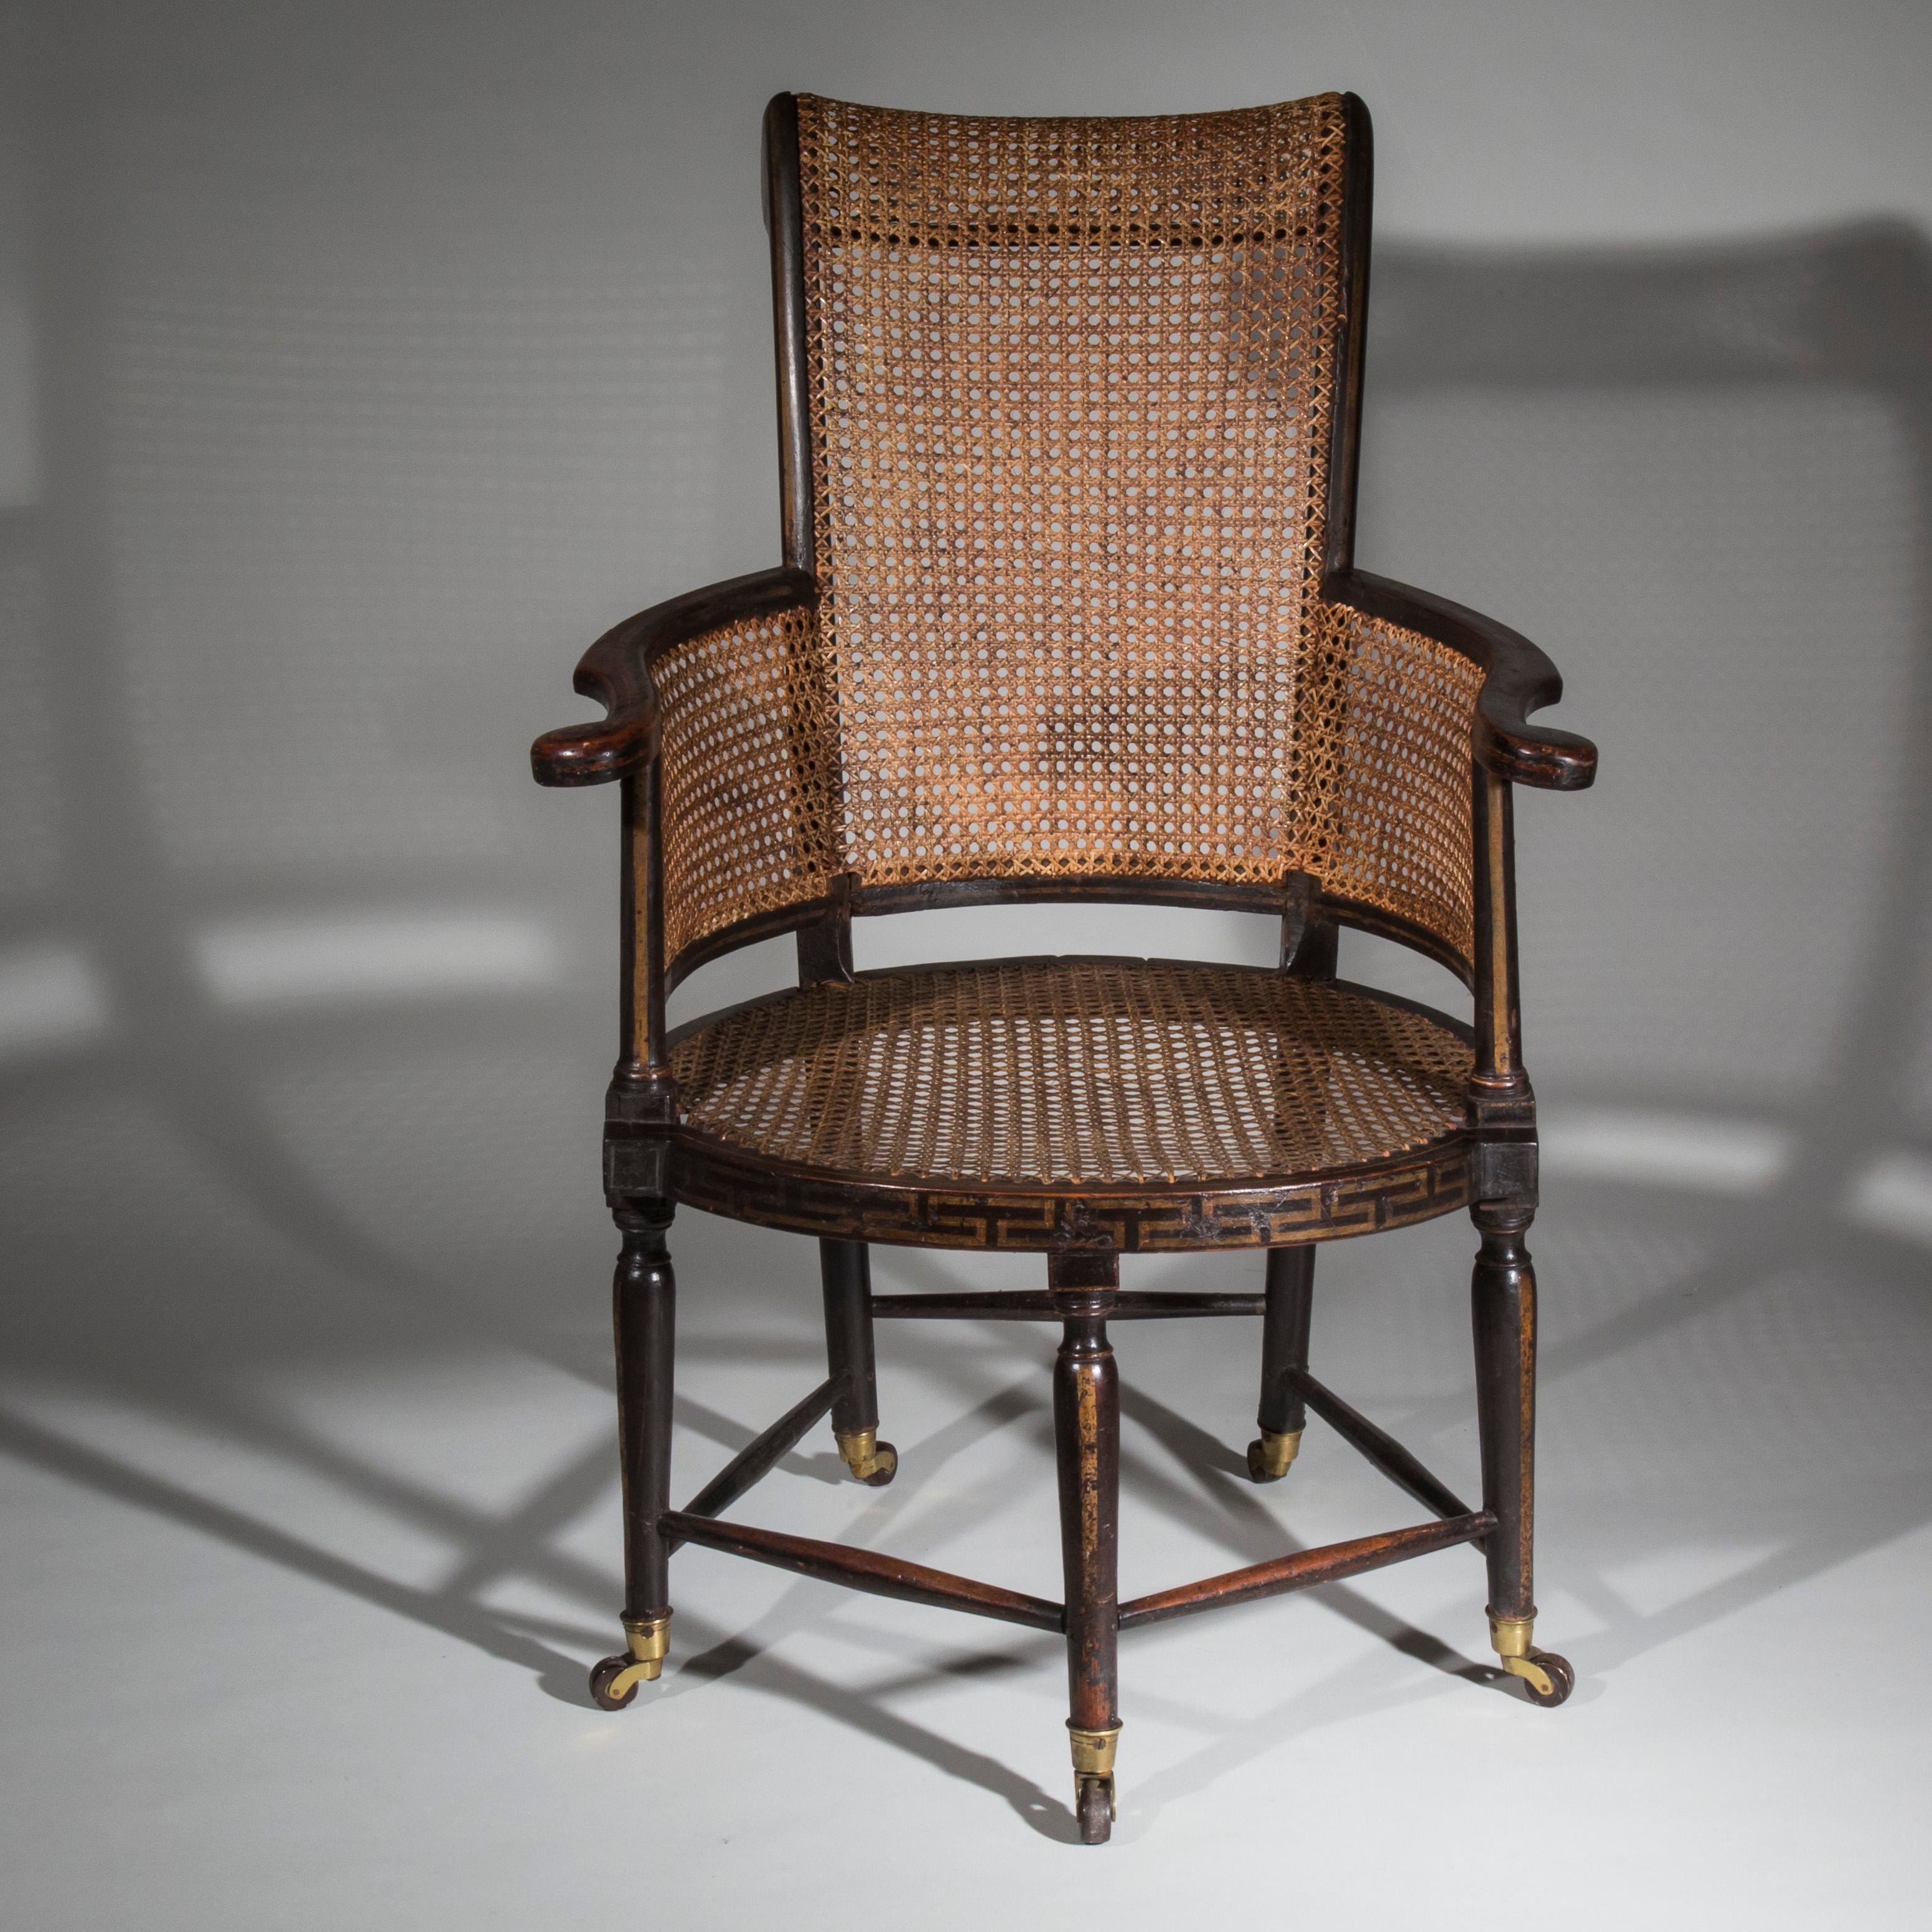 An extremely unusual early 19th century caned bergere armchair, monochrome black japanned and decorated in the Greek Revival taste with Greek key and scrolling volute motifs,

Possibly English or Irish, circa 1800.

The doyenne of what was to